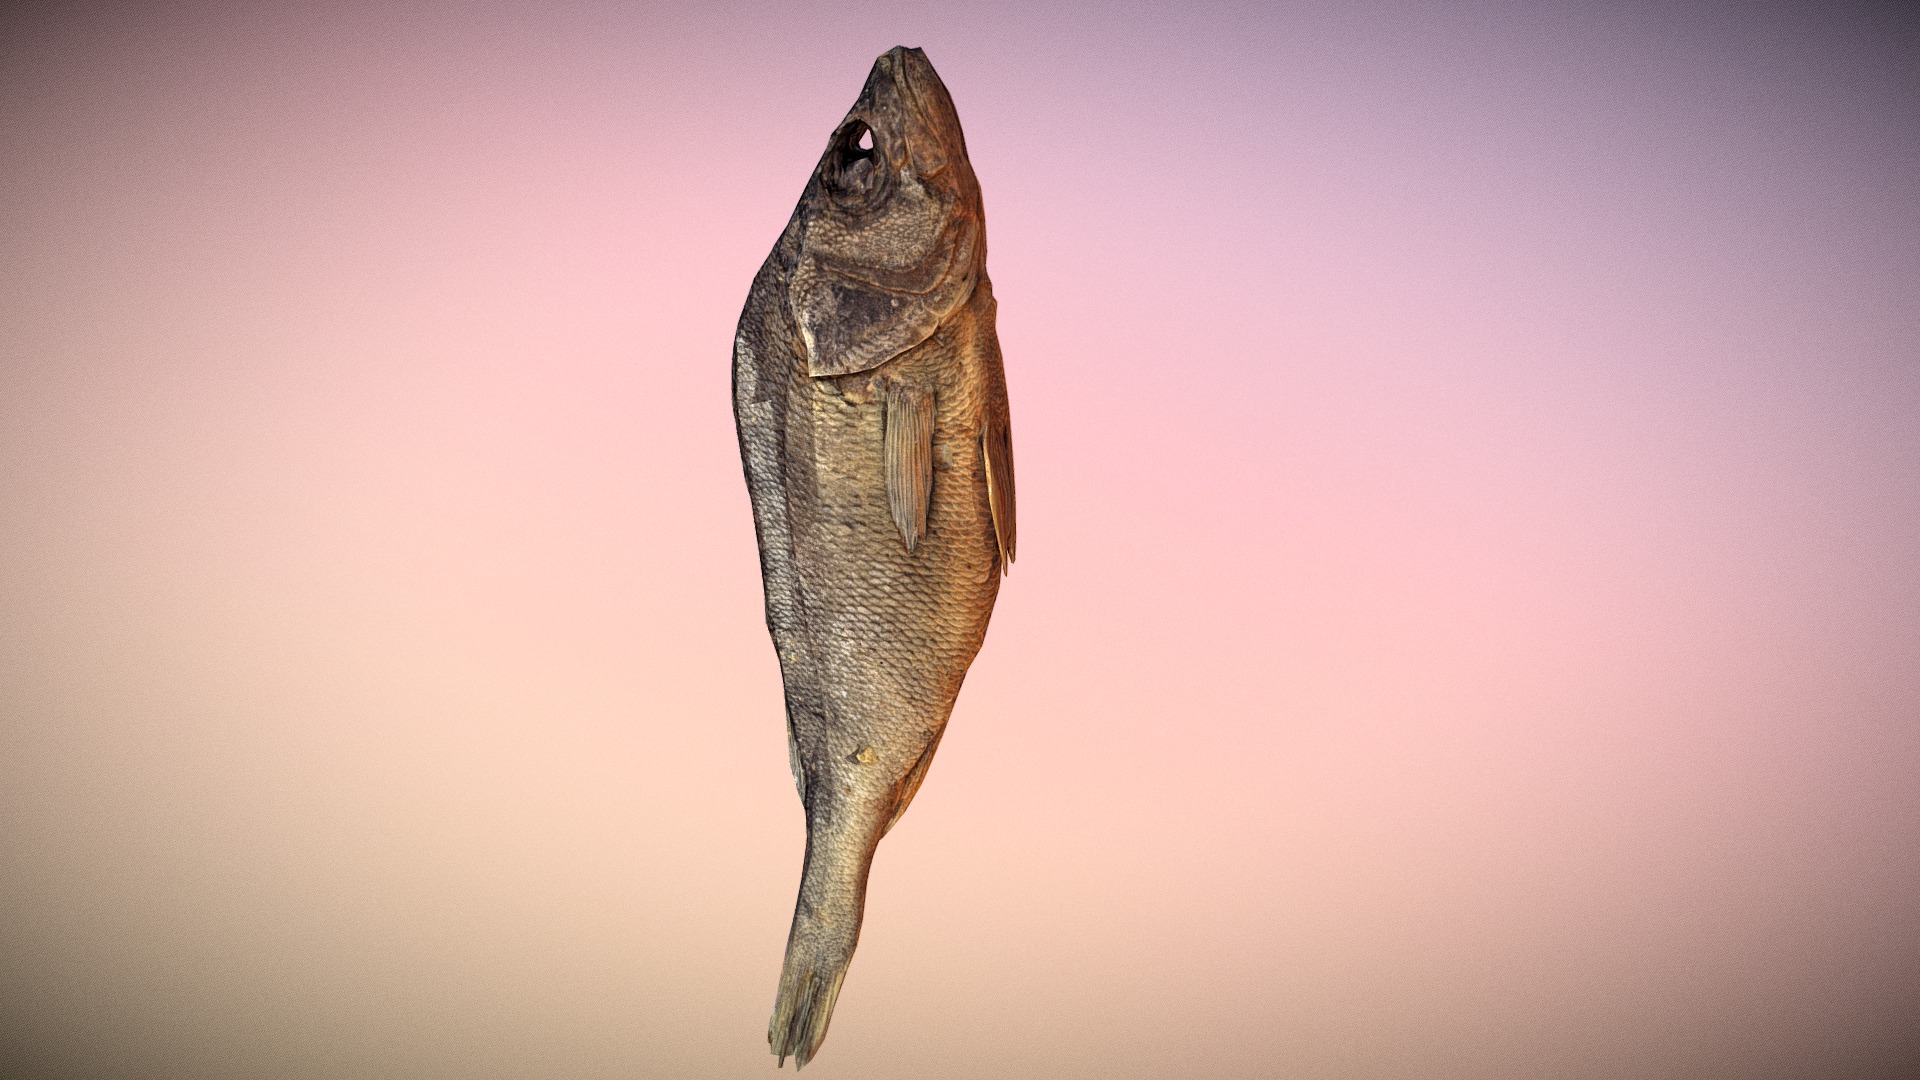 3D model small photorealistic dried fish - This is a 3D model of the small photorealistic dried fish. The 3D model is about a fish with a long tail.